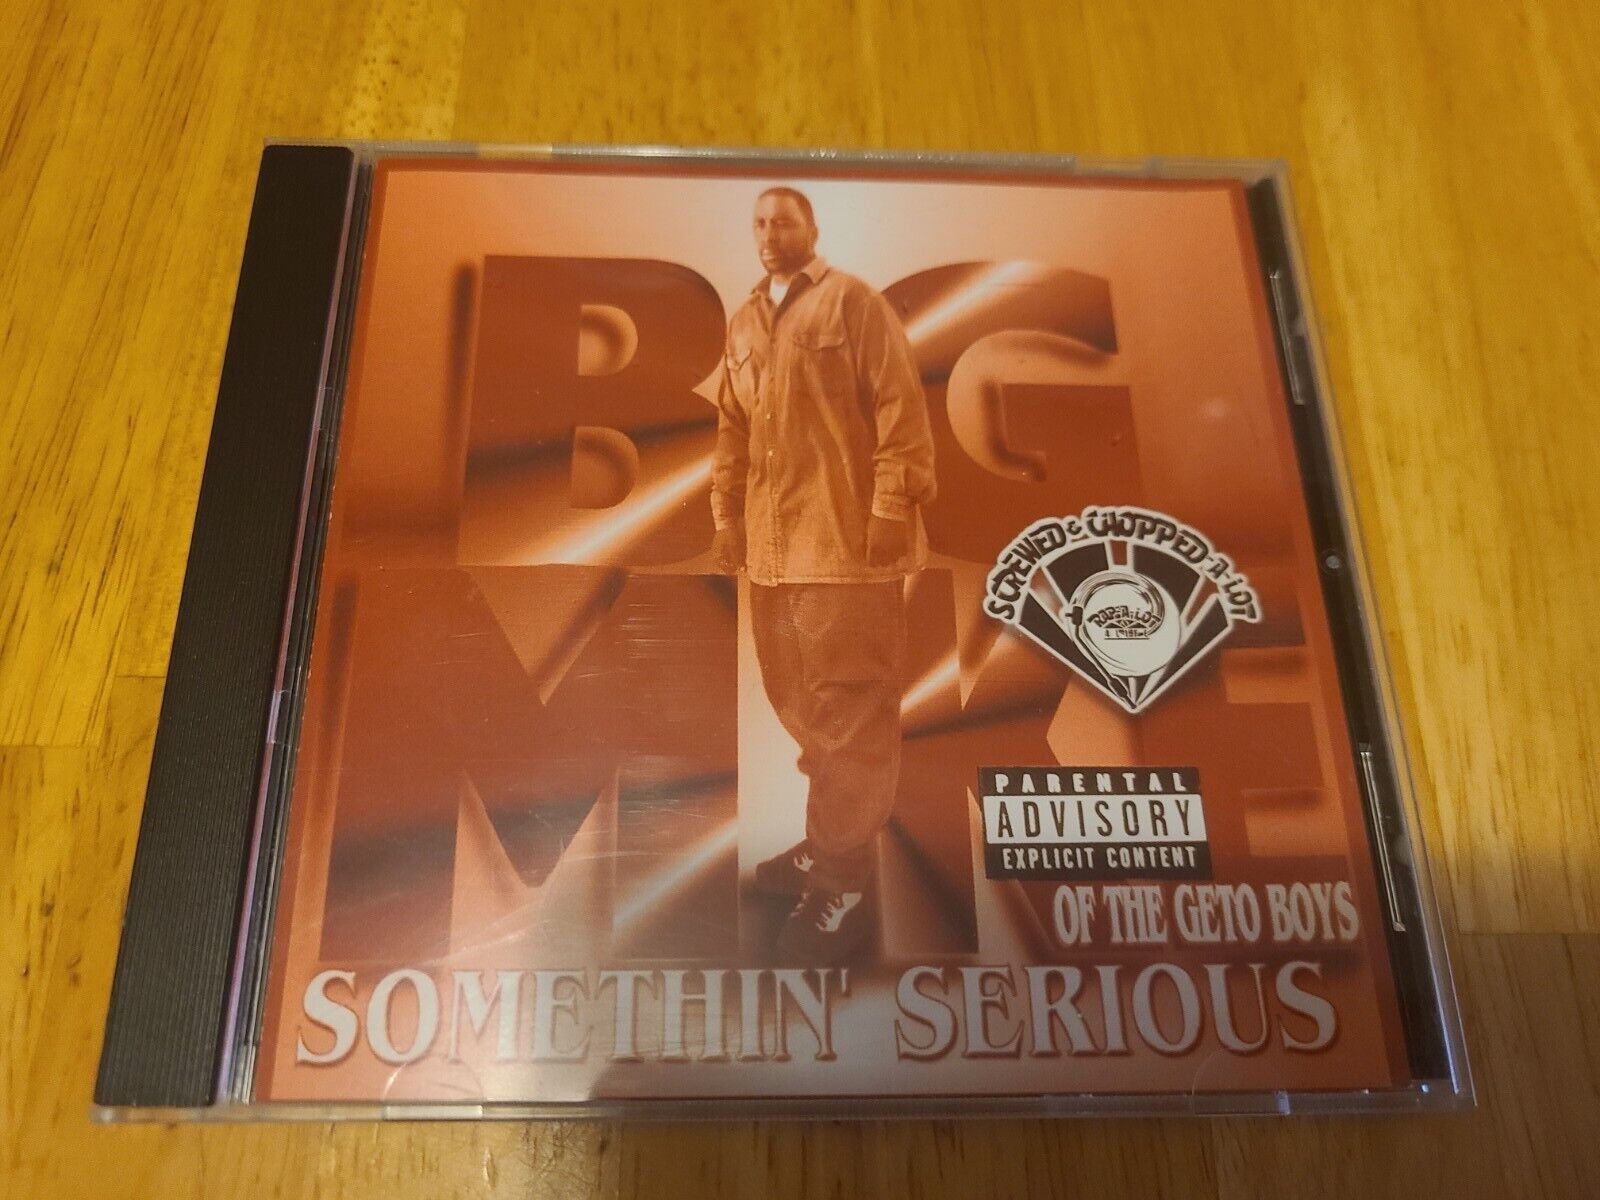 Big Mike - Somethin Serious: Screwed & Chopped-A-Lot (CD, 2004)